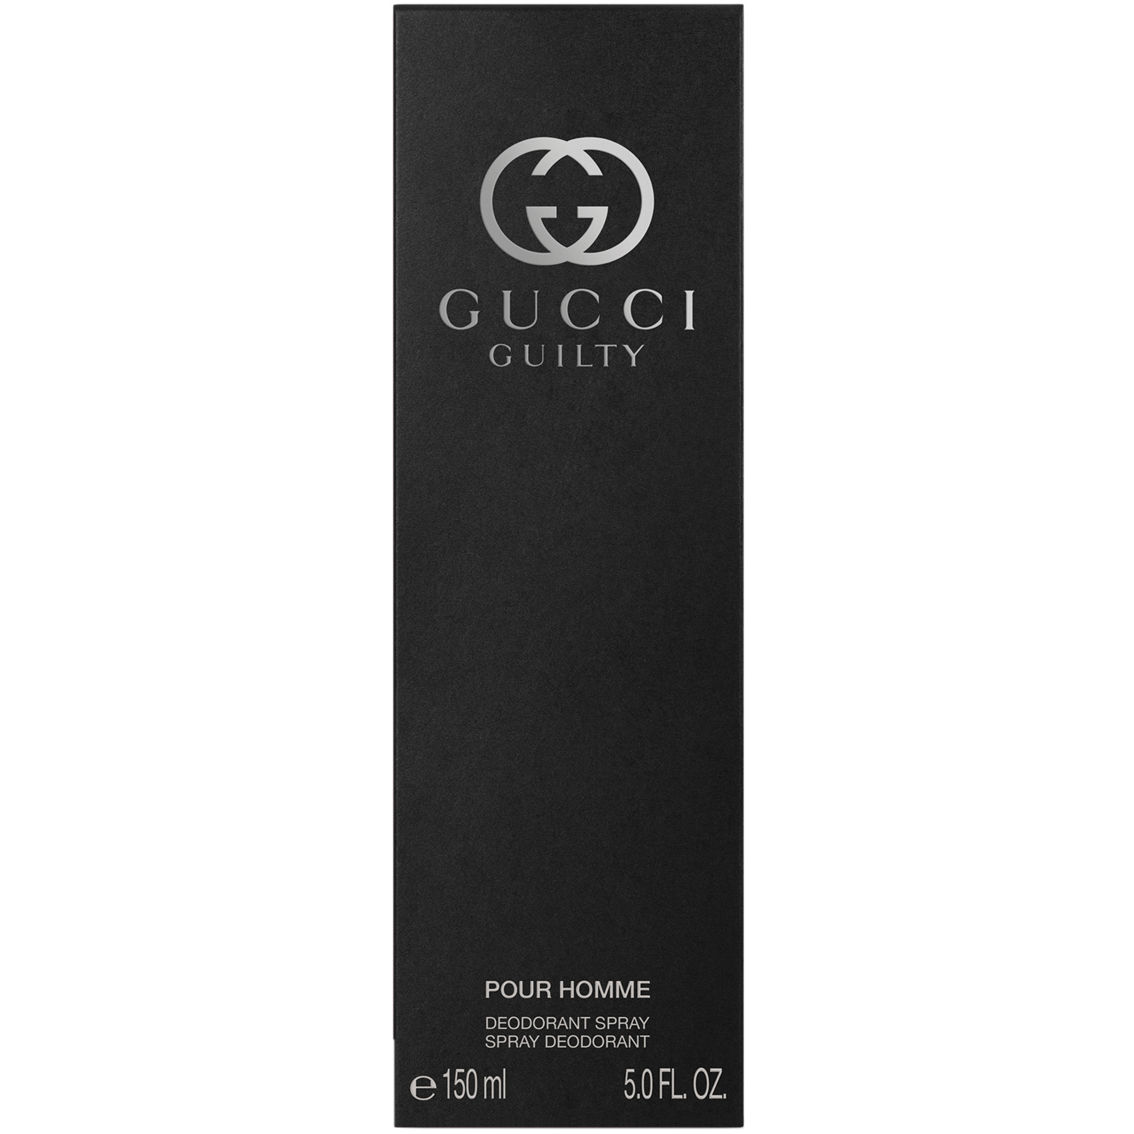 Gucci Guilty Pour Homme Deodorant Spray, 5 oz. - Image 3 of 3